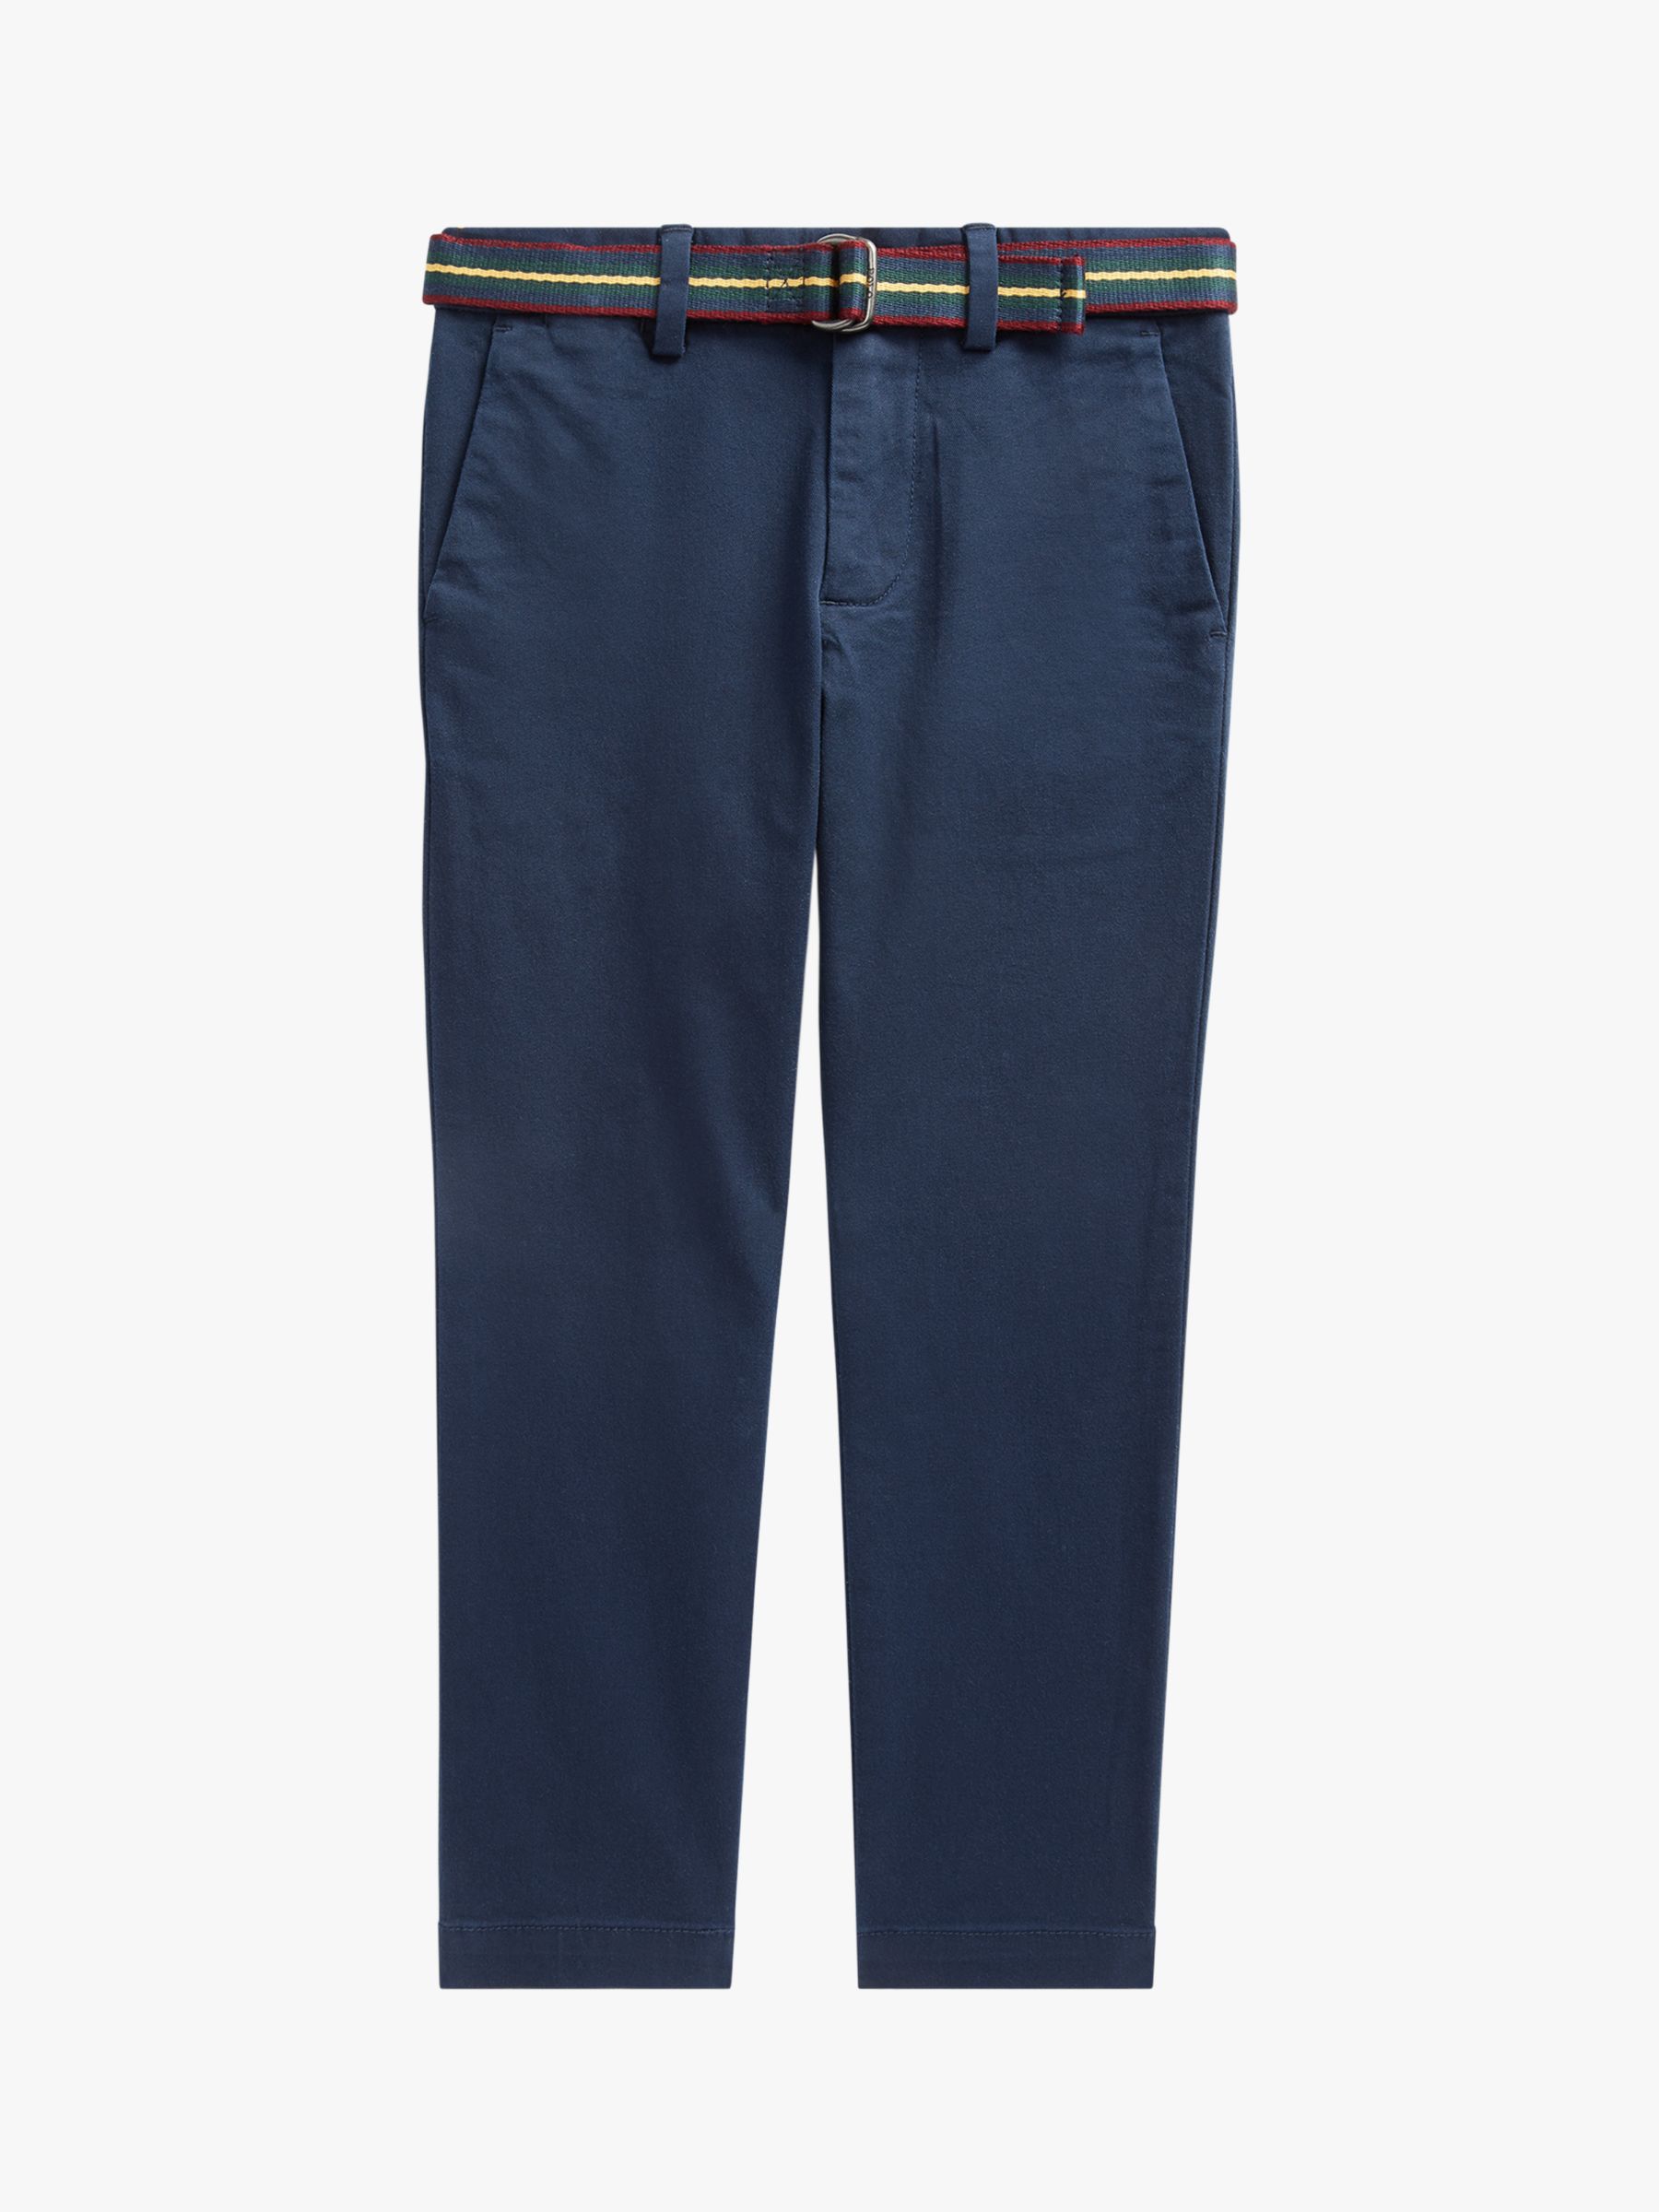 Image of Polo Ralph Lauren Boys Stretch Chino Trousers